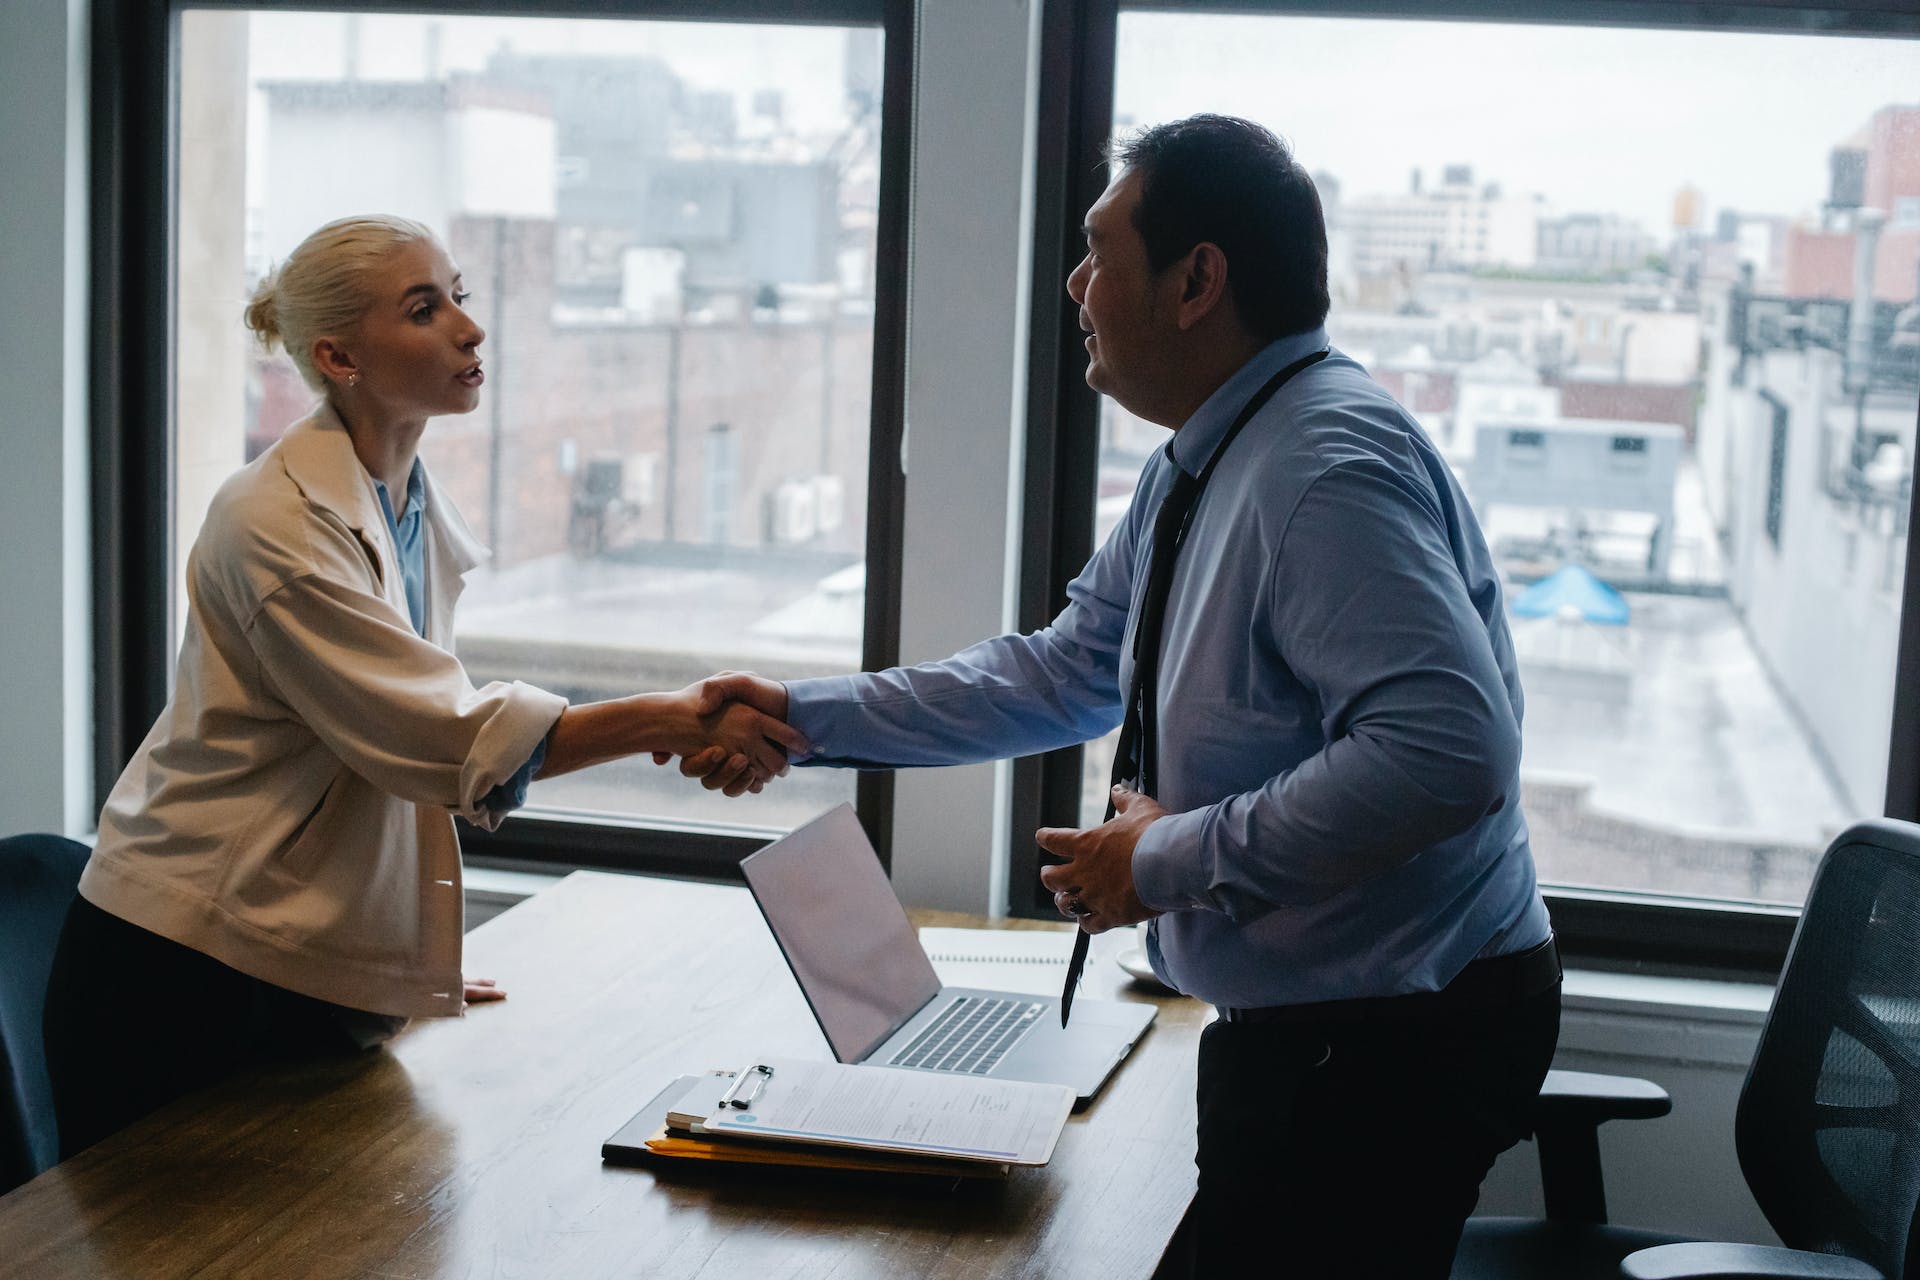 A woman shaking hands with a man in an office | Source: Pexels